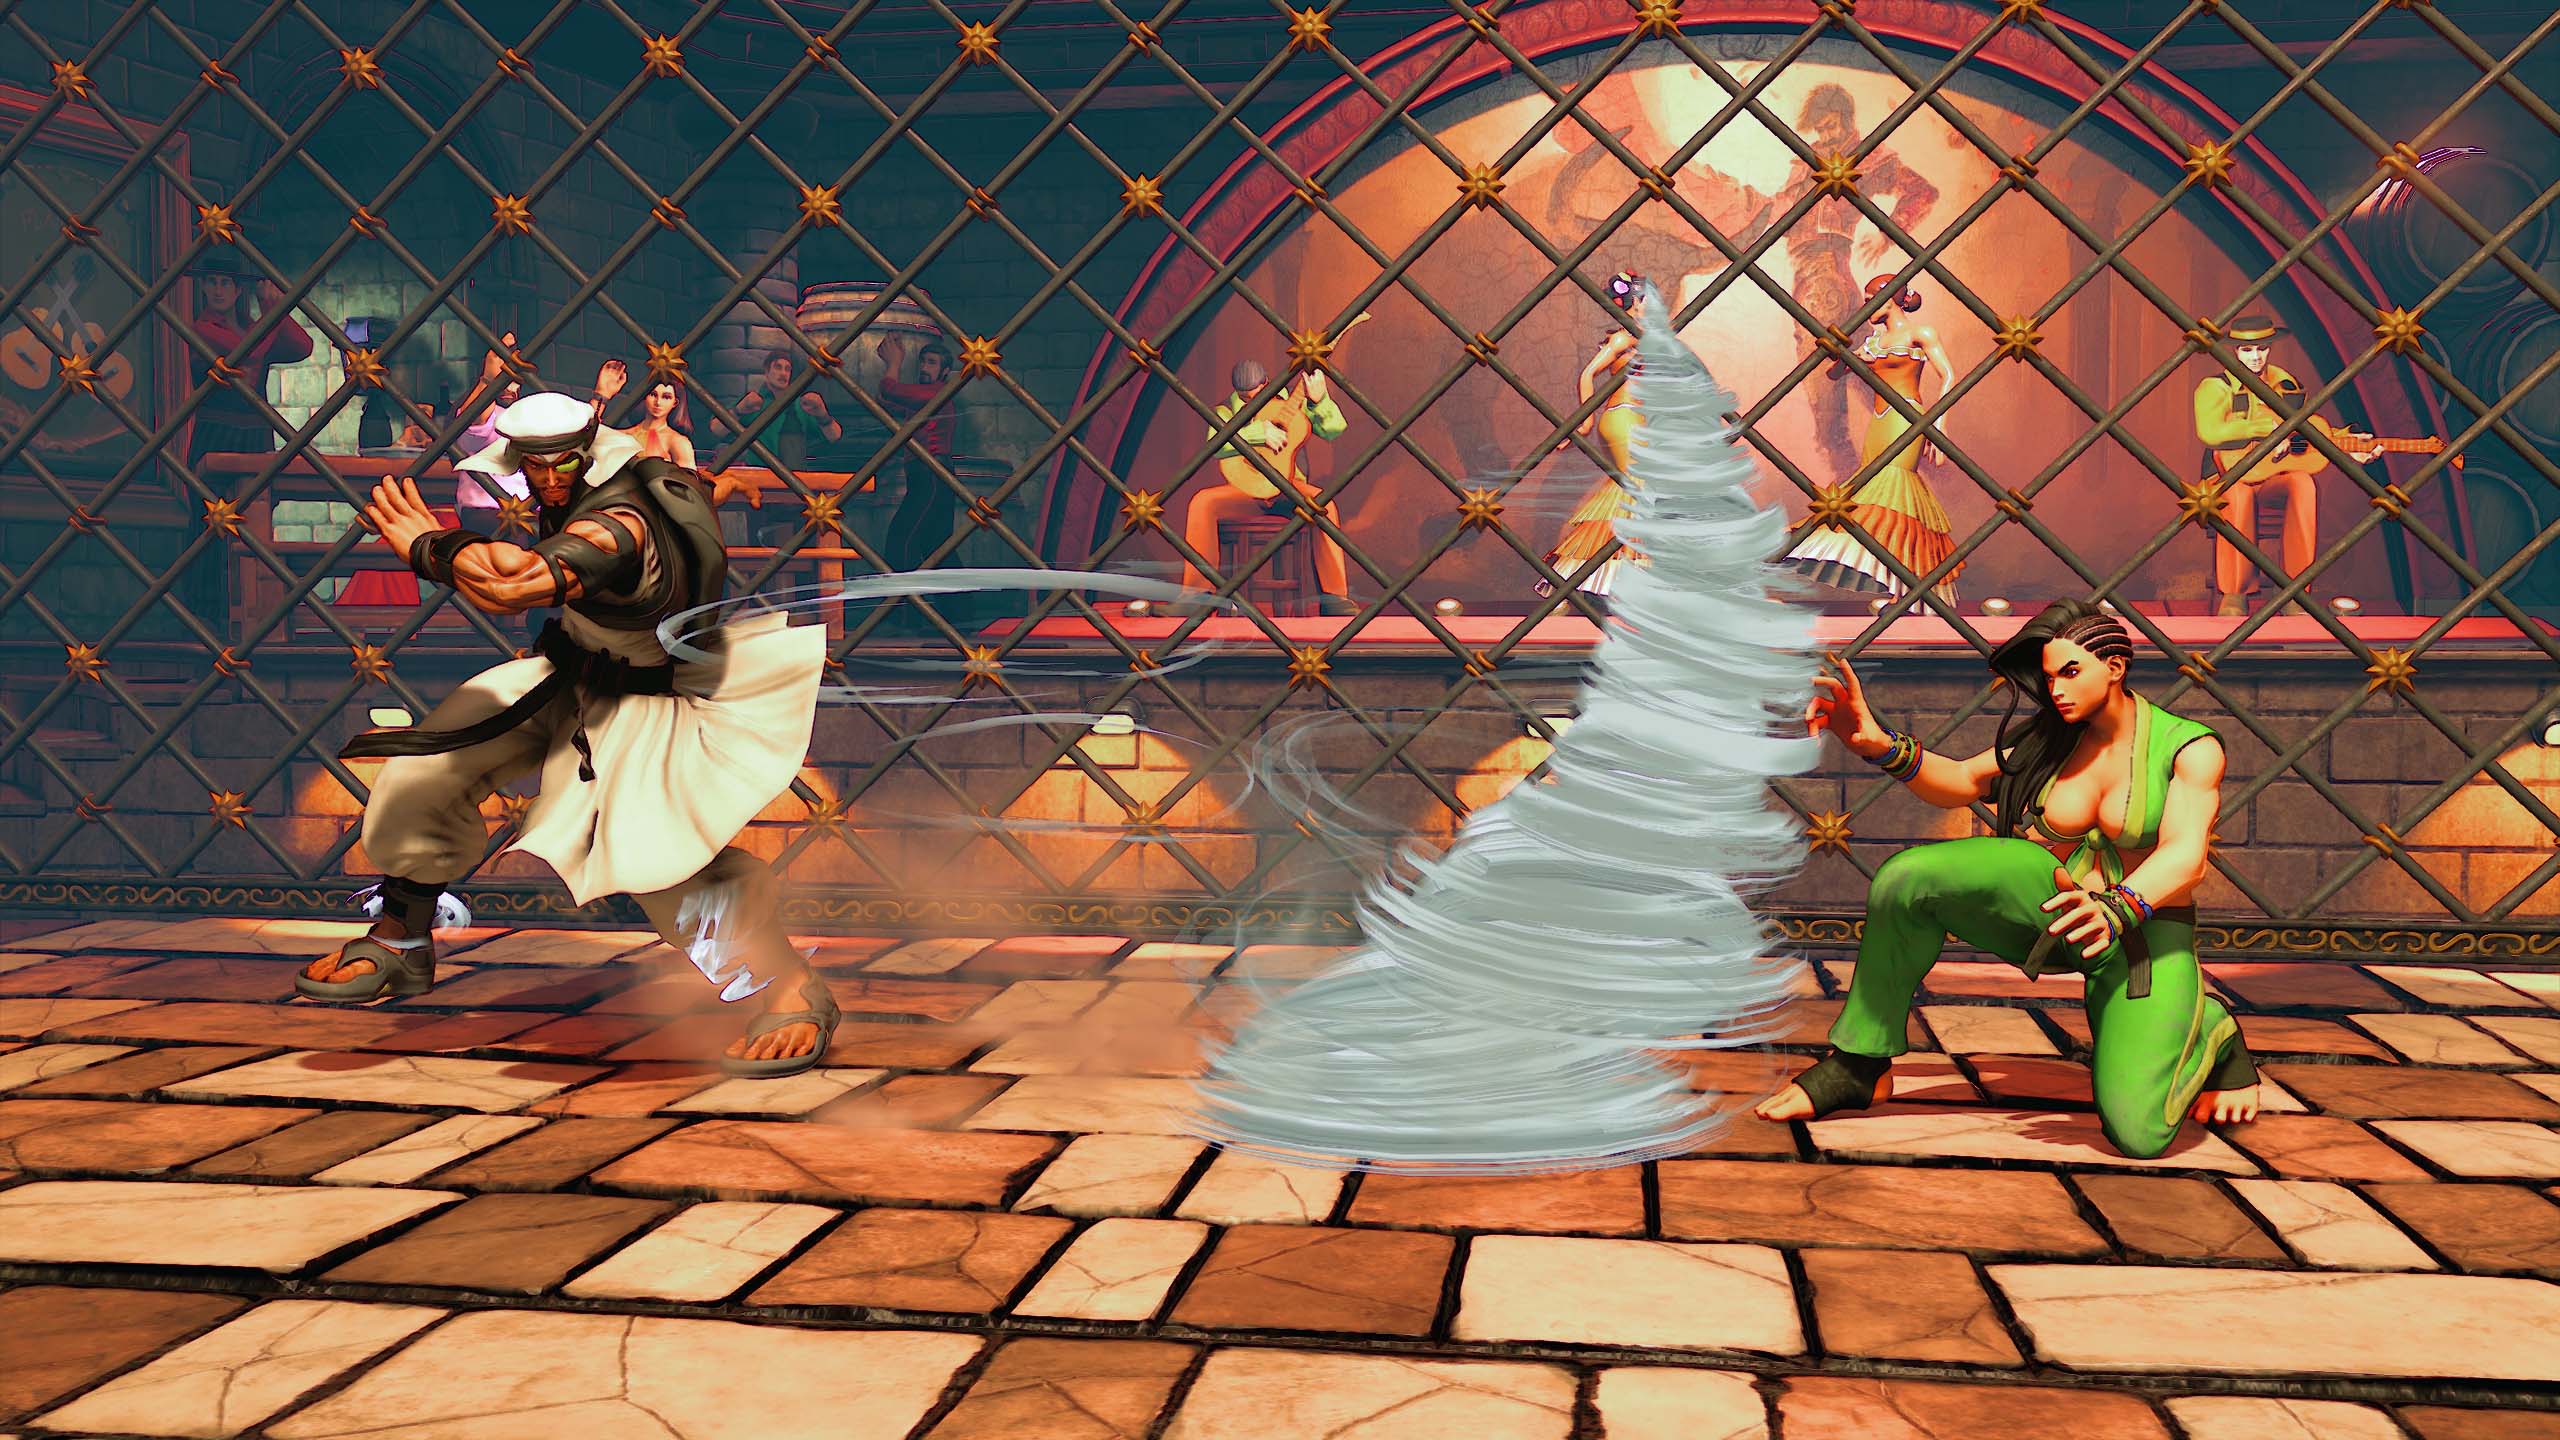 Street Fighter V - Guile Move List on Make a GIF